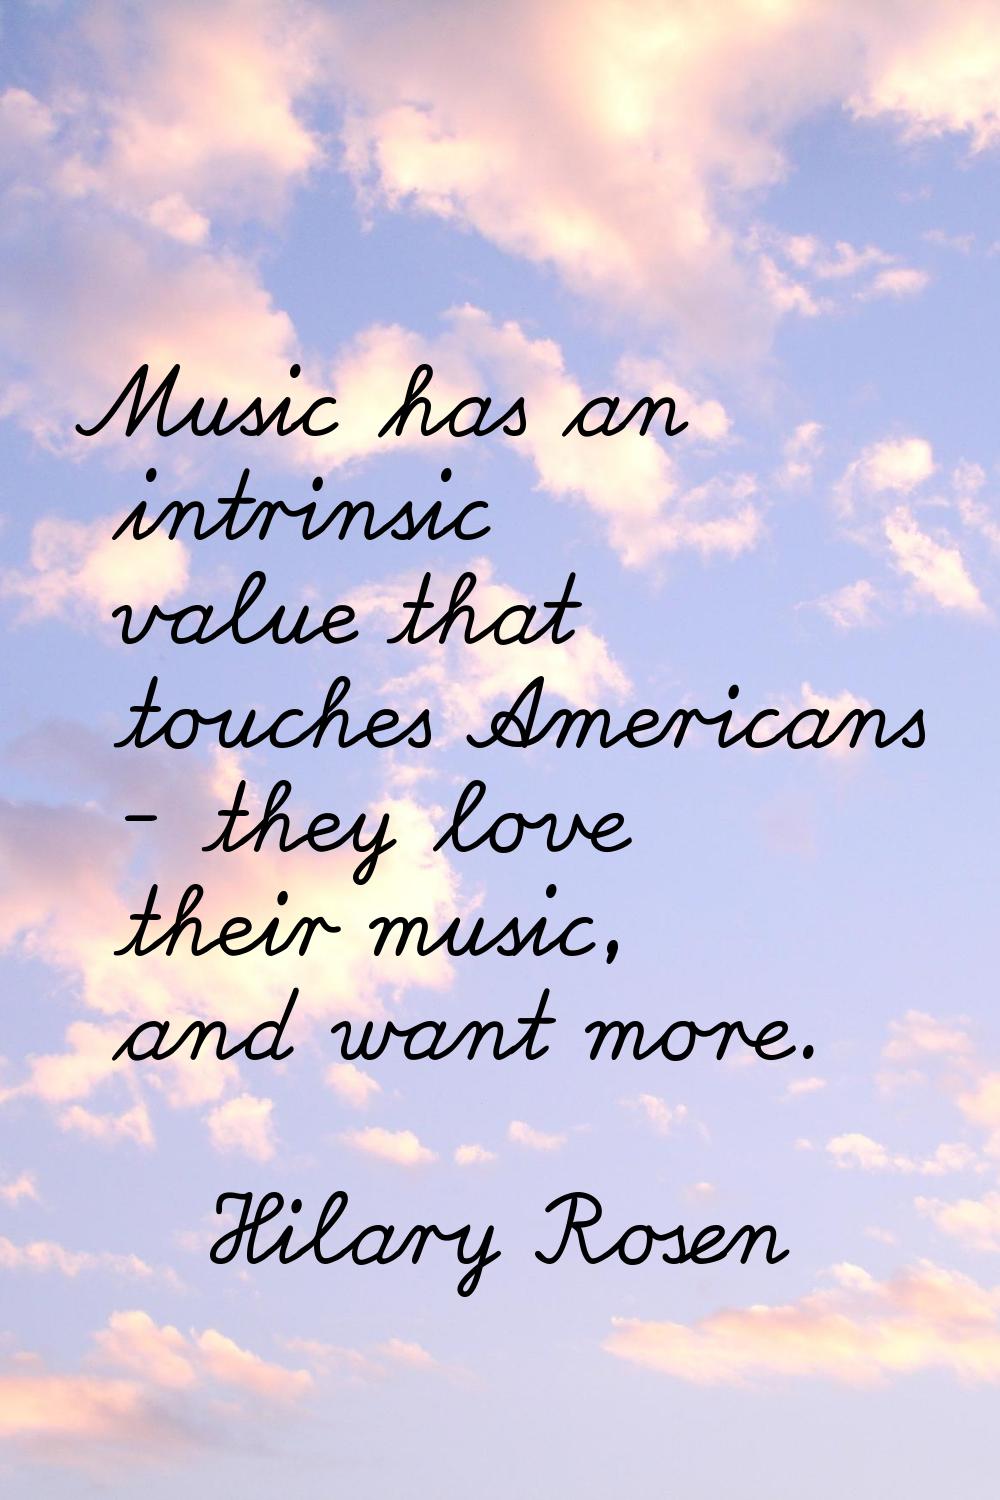 Music has an intrinsic value that touches Americans - they love their music, and want more.